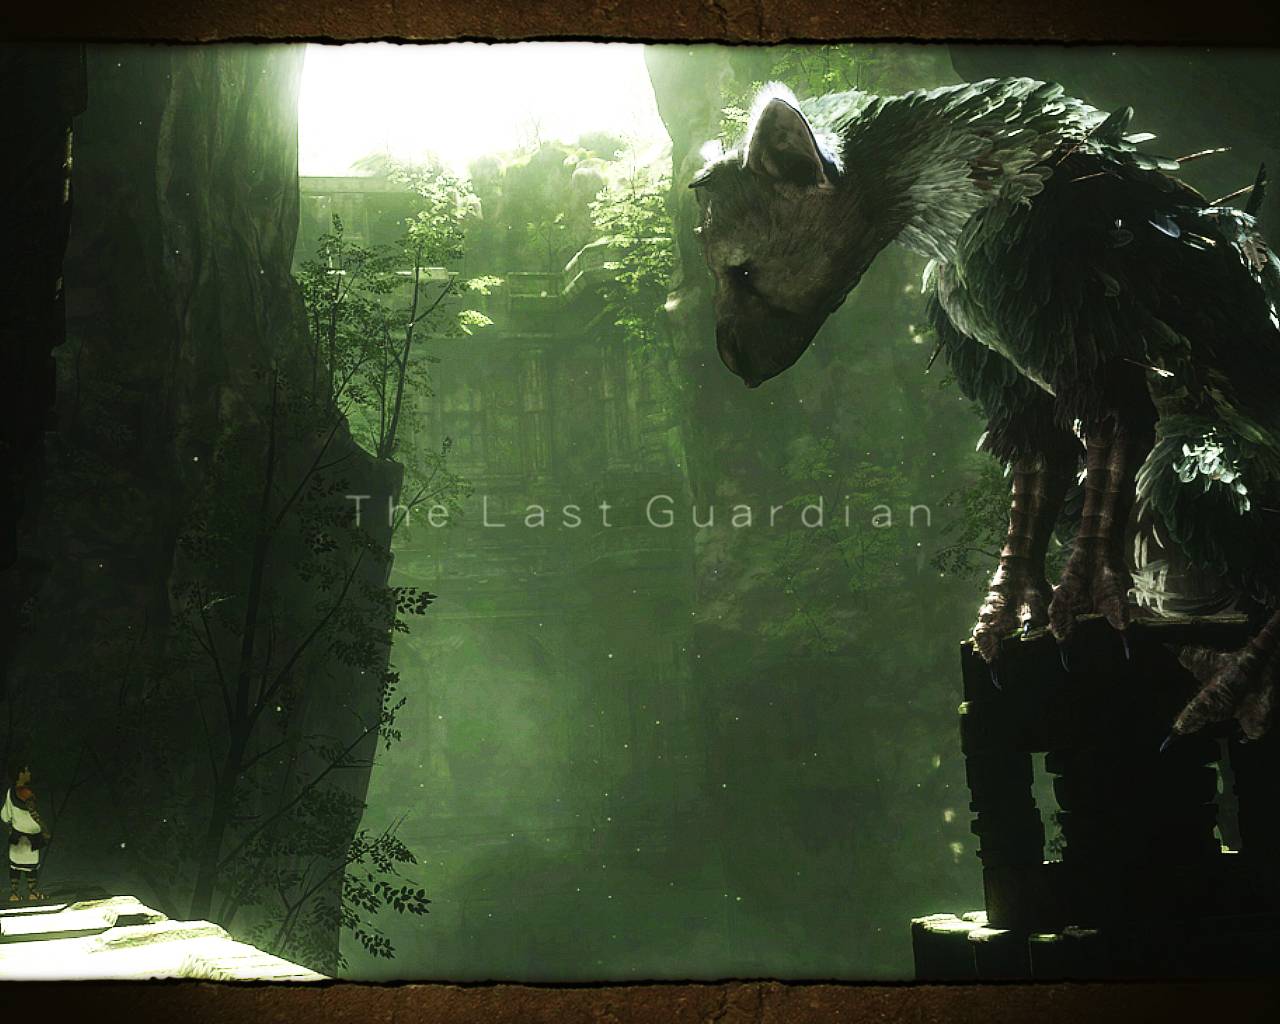 The Last Guardian” Lives